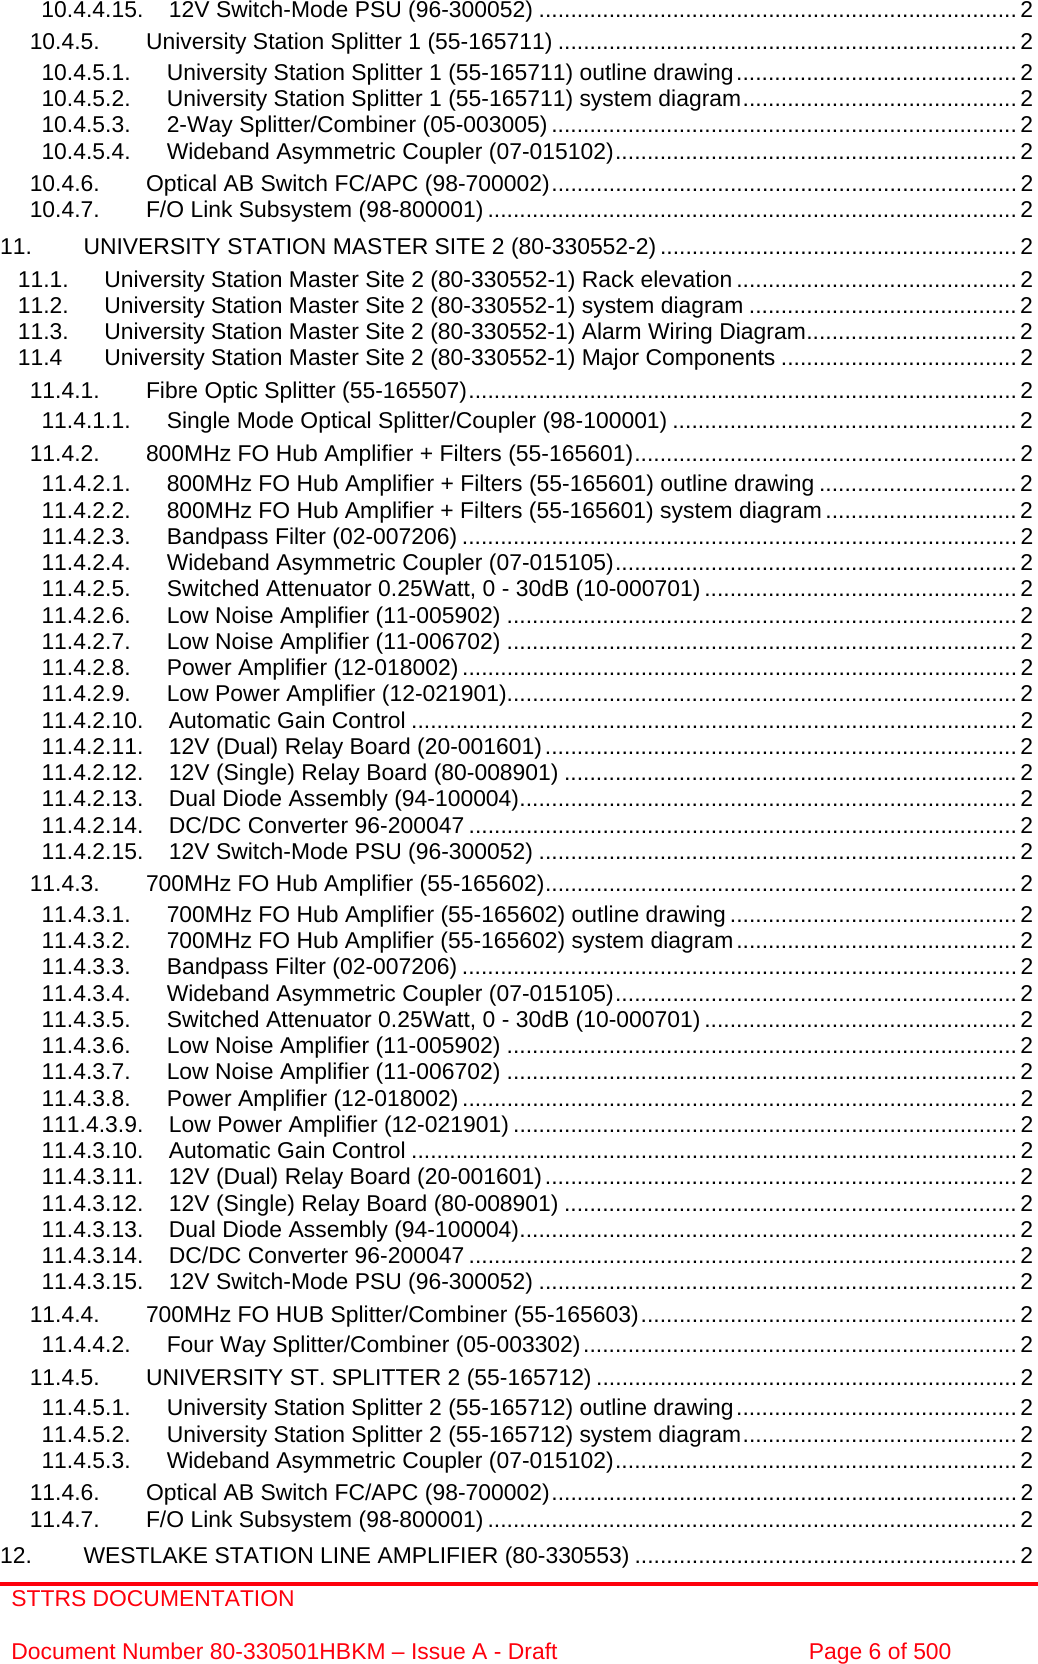 STTRS DOCUMENTATION  Document Number 80-330501HBKM – Issue A - Draft  Page 6 of 500  10.4.4.15. 12V Switch-Mode PSU (96-300052) ........................................................................... 2 10.4.5. University Station Splitter 1 (55-165711) ........................................................................ 2 10.4.5.1. University Station Splitter 1 (55-165711) outline drawing............................................2 10.4.5.2. University Station Splitter 1 (55-165711) system diagram........................................... 2 10.4.5.3. 2-Way Splitter/Combiner (05-003005) ......................................................................... 2 10.4.5.4. Wideband Asymmetric Coupler (07-015102)............................................................... 2 10.4.6. Optical AB Switch FC/APC (98-700002).........................................................................2 10.4.7. F/O Link Subsystem (98-800001) ...................................................................................2 11. UNIVERSITY STATION MASTER SITE 2 (80-330552-2) ........................................................ 2 11.1. University Station Master Site 2 (80-330552-1) Rack elevation ............................................2 11.2. University Station Master Site 2 (80-330552-1) system diagram .......................................... 2 11.3. University Station Master Site 2 (80-330552-1) Alarm Wiring Diagram................................. 2 11.4 University Station Master Site 2 (80-330552-1) Major Components ..................................... 2 11.4.1. Fibre Optic Splitter (55-165507)...................................................................................... 2 11.4.1.1. Single Mode Optical Splitter/Coupler (98-100001) ......................................................2 11.4.2. 800MHz FO Hub Amplifier + Filters (55-165601)............................................................ 2 11.4.2.1. 800MHz FO Hub Amplifier + Filters (55-165601) outline drawing ............................... 2 11.4.2.2. 800MHz FO Hub Amplifier + Filters (55-165601) system diagram .............................. 2 11.4.2.3. Bandpass Filter (02-007206) ....................................................................................... 2 11.4.2.4. Wideband Asymmetric Coupler (07-015105)............................................................... 2 11.4.2.5. Switched Attenuator 0.25Watt, 0 - 30dB (10-000701) ................................................. 2 11.4.2.6. Low Noise Amplifier (11-005902) ................................................................................2 11.4.2.7. Low Noise Amplifier (11-006702) ................................................................................2 11.4.2.8. Power Amplifier (12-018002) ....................................................................................... 2 11.4.2.9. Low Power Amplifier (12-021901)................................................................................2 11.4.2.10. Automatic Gain Control ............................................................................................... 2 11.4.2.11. 12V (Dual) Relay Board (20-001601).......................................................................... 2 11.4.2.12. 12V (Single) Relay Board (80-008901) ....................................................................... 2 11.4.2.13. Dual Diode Assembly (94-100004).............................................................................. 2 11.4.2.14. DC/DC Converter 96-200047 ...................................................................................... 2 11.4.2.15. 12V Switch-Mode PSU (96-300052) ........................................................................... 2 11.4.3. 700MHz FO Hub Amplifier (55-165602).......................................................................... 2 11.4.3.1. 700MHz FO Hub Amplifier (55-165602) outline drawing .............................................2 11.4.3.2. 700MHz FO Hub Amplifier (55-165602) system diagram............................................ 2 11.4.3.3. Bandpass Filter (02-007206) ....................................................................................... 2 11.4.3.4. Wideband Asymmetric Coupler (07-015105)............................................................... 2 11.4.3.5. Switched Attenuator 0.25Watt, 0 - 30dB (10-000701) ................................................. 2 11.4.3.6. Low Noise Amplifier (11-005902) ................................................................................2 11.4.3.7. Low Noise Amplifier (11-006702) ................................................................................2 11.4.3.8. Power Amplifier (12-018002) ....................................................................................... 2 111.4.3.9. Low Power Amplifier (12-021901) ...............................................................................2 11.4.3.10. Automatic Gain Control ............................................................................................... 2 11.4.3.11. 12V (Dual) Relay Board (20-001601).......................................................................... 2 11.4.3.12. 12V (Single) Relay Board (80-008901) ....................................................................... 2 11.4.3.13. Dual Diode Assembly (94-100004).............................................................................. 2 11.4.3.14. DC/DC Converter 96-200047 ...................................................................................... 2 11.4.3.15. 12V Switch-Mode PSU (96-300052) ........................................................................... 2 11.4.4. 700MHz FO HUB Splitter/Combiner (55-165603)........................................................... 2 11.4.4.2. Four Way Splitter/Combiner (05-003302)....................................................................2 11.4.5. UNIVERSITY ST. SPLITTER 2 (55-165712) .................................................................. 2 11.4.5.1. University Station Splitter 2 (55-165712) outline drawing............................................2 11.4.5.2. University Station Splitter 2 (55-165712) system diagram........................................... 2 11.4.5.3. Wideband Asymmetric Coupler (07-015102)............................................................... 2 11.4.6. Optical AB Switch FC/APC (98-700002).........................................................................2 11.4.7. F/O Link Subsystem (98-800001) ...................................................................................2 12. WESTLAKE STATION LINE AMPLIFIER (80-330553) ............................................................2 